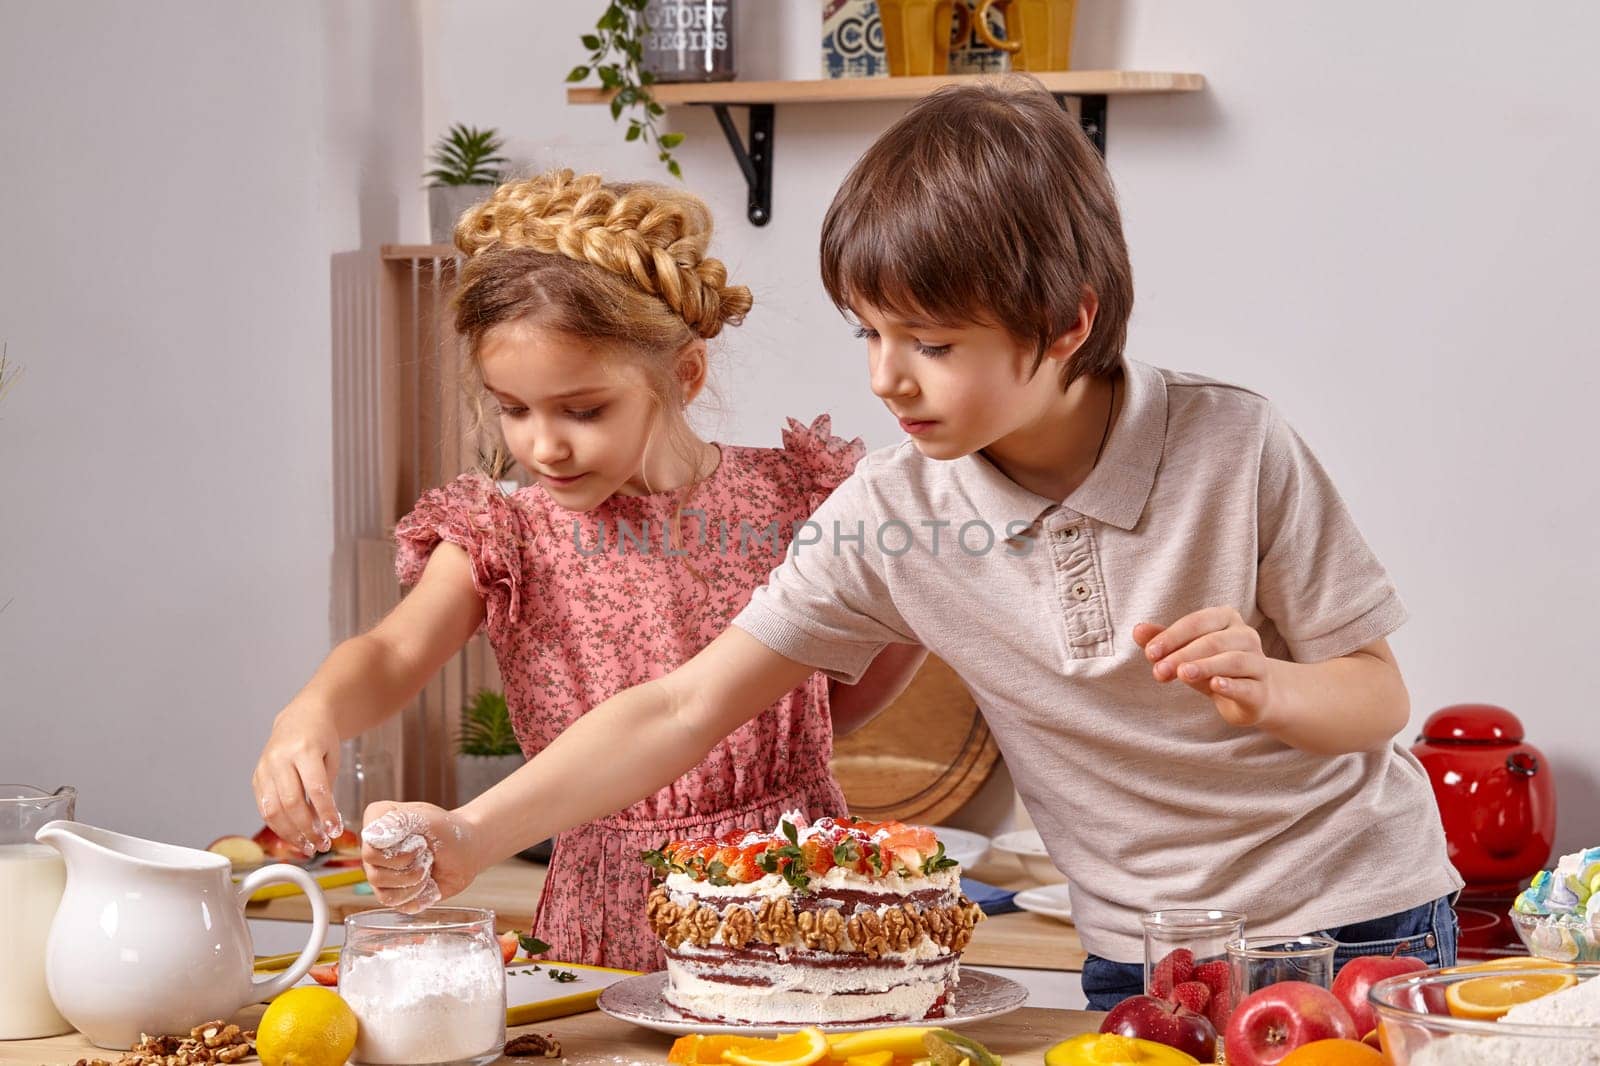 Little brunette boy dressed in a light t-shirt and jeans and a beautiful girl with a braid in her hair, wearing in a pink dress are making a cake at a kitchen, against a white wall with shelves on it. Children taking some powdered sugar in order to sprinkle a cake.